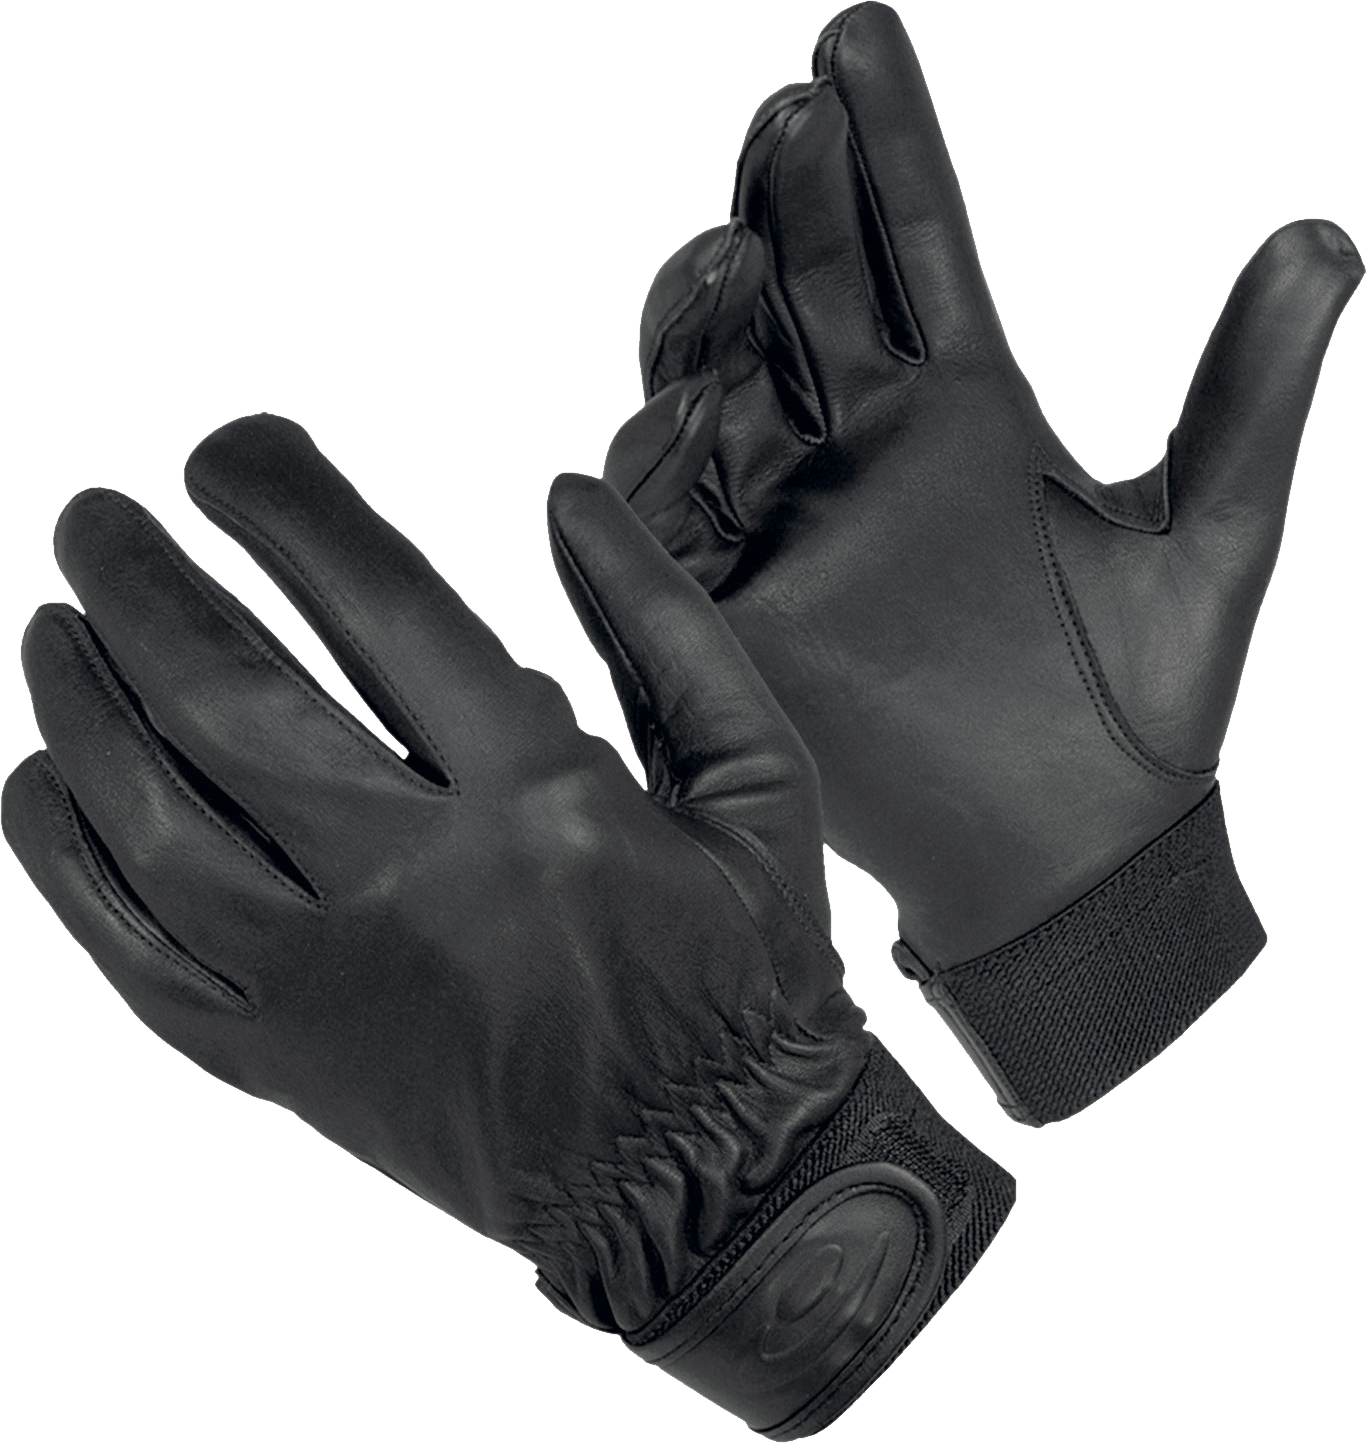 Leather Gloves Png Image PNG Image